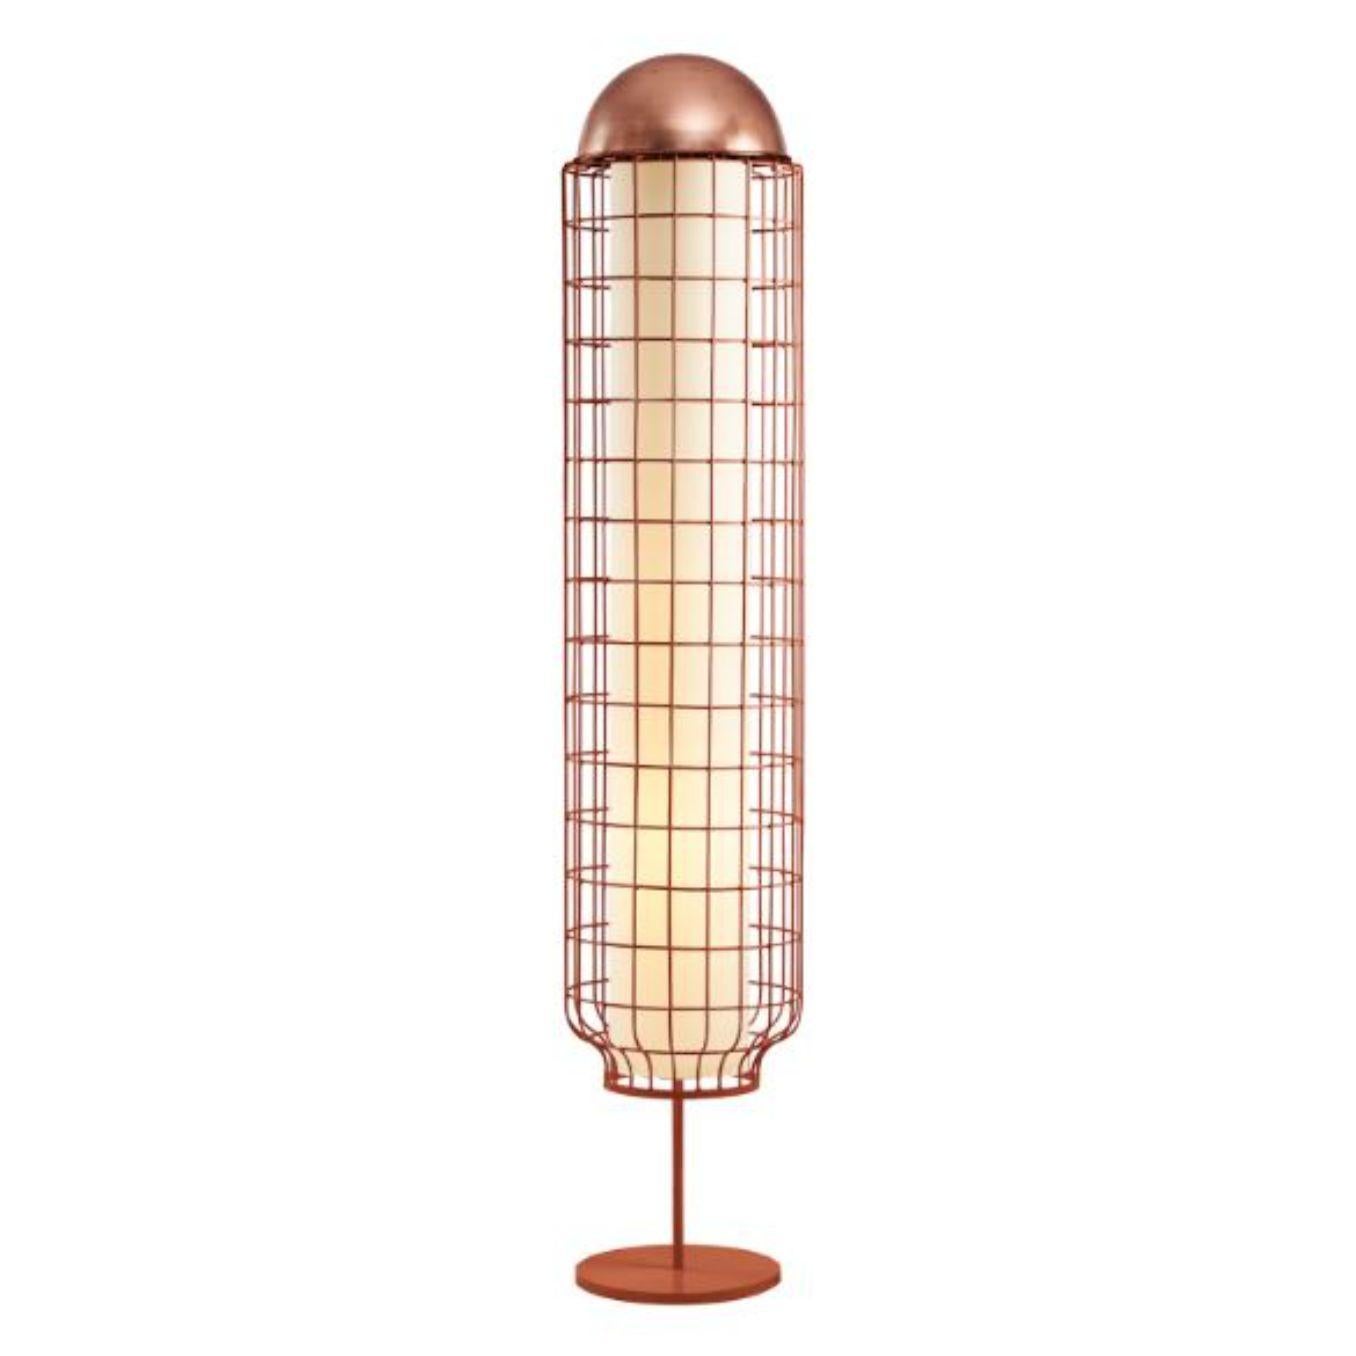 Copper Magnolia floor lamp by Dooq
Dimensions: W 37 x D 37 x H 170 cm
Materials: lacquered metal, polished or brushed metal, copper.
abat-jour: cotton
Also available in different colours and materials.

Information:
230V/50Hz
E27/2x20W